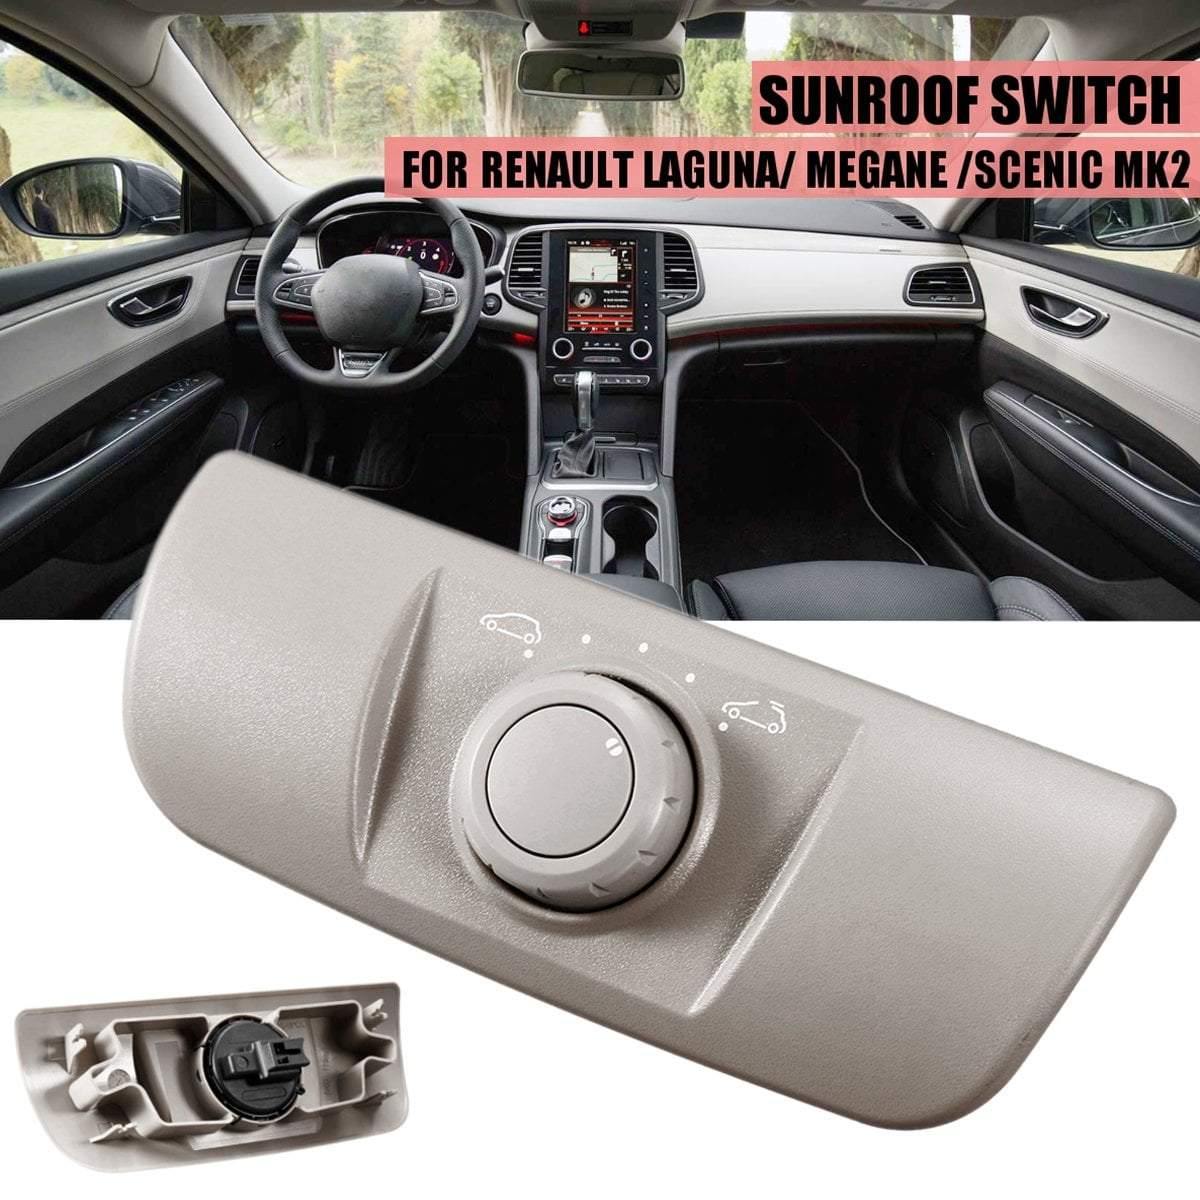 Planet+Gates+Renault+Megane+SCENIC+LAGUNA+MK2+HB+2002-2015+Sunroof+Window+Switch+Control+8200119893+Auto+Replacement+Parts+Switches